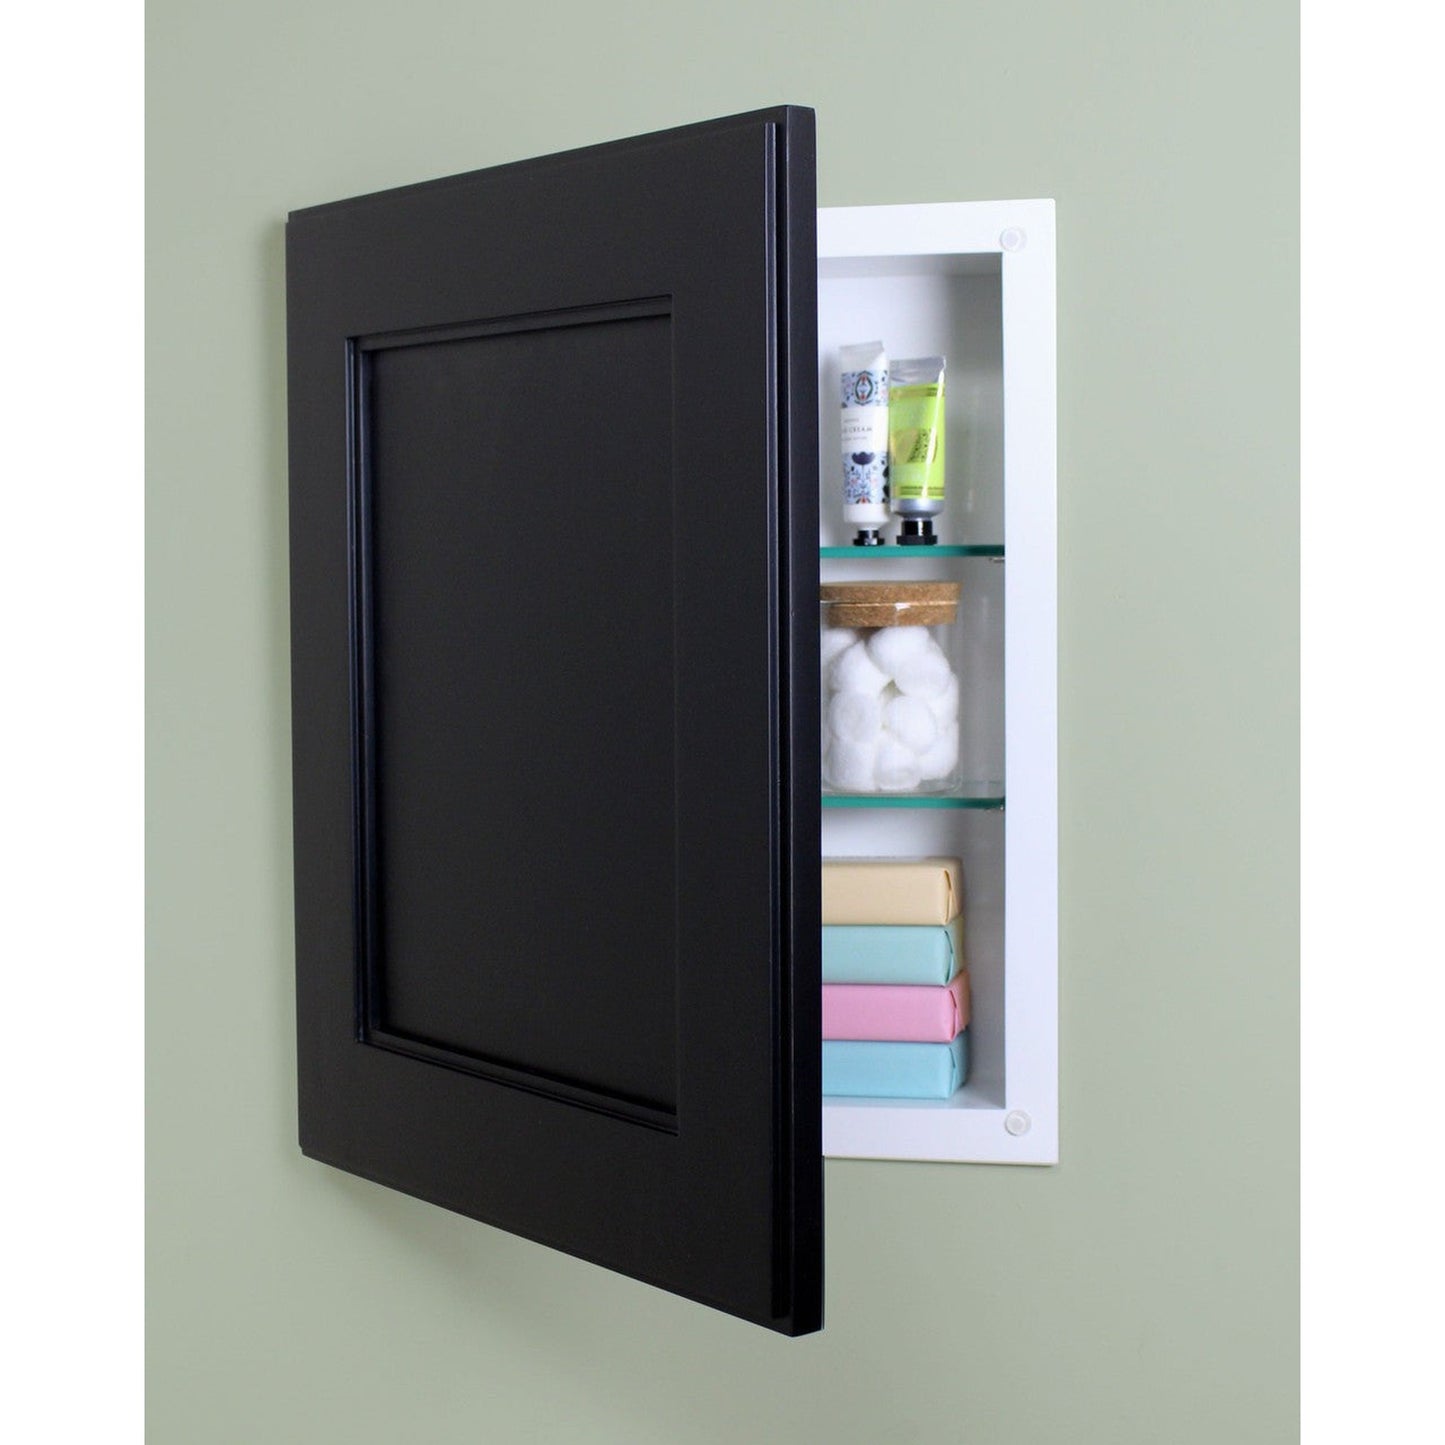 Fox Hollow Furnishings 14" x 18" Black Shaker Style Standard 4" Depth White Interior Recessed Medicine Cabinet With Mirror